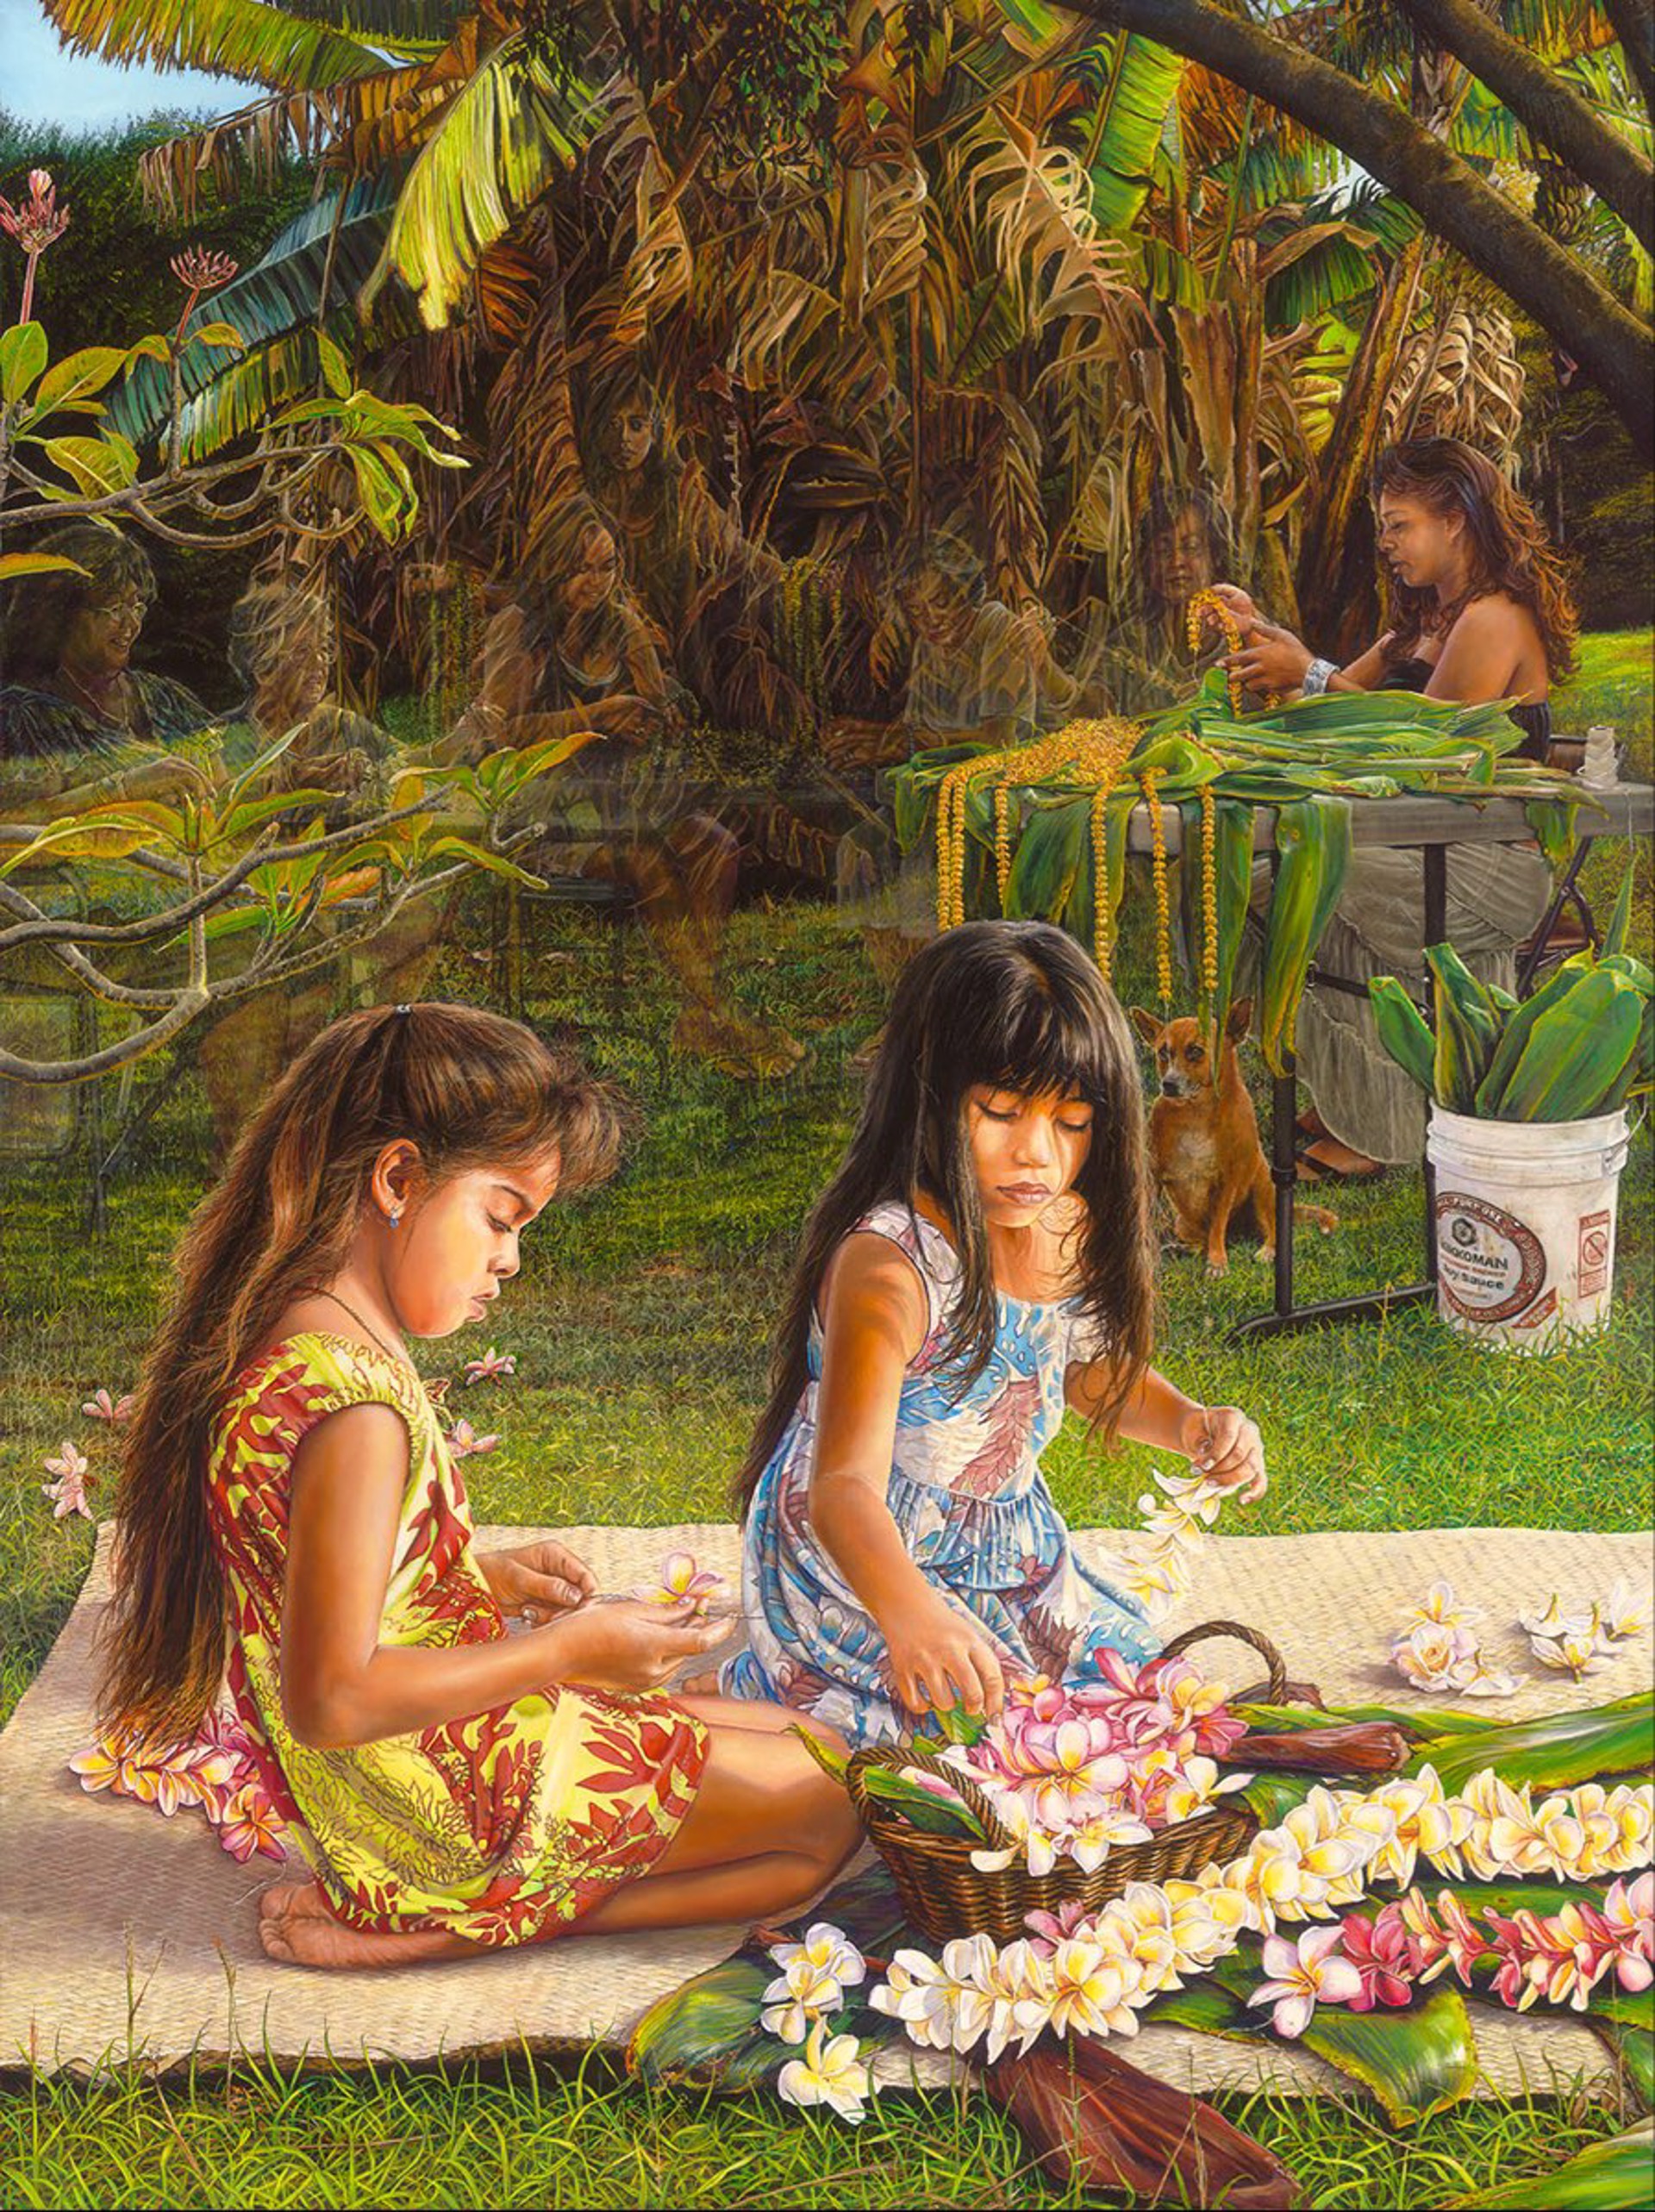 A Circle of Lei Makers by Leohone